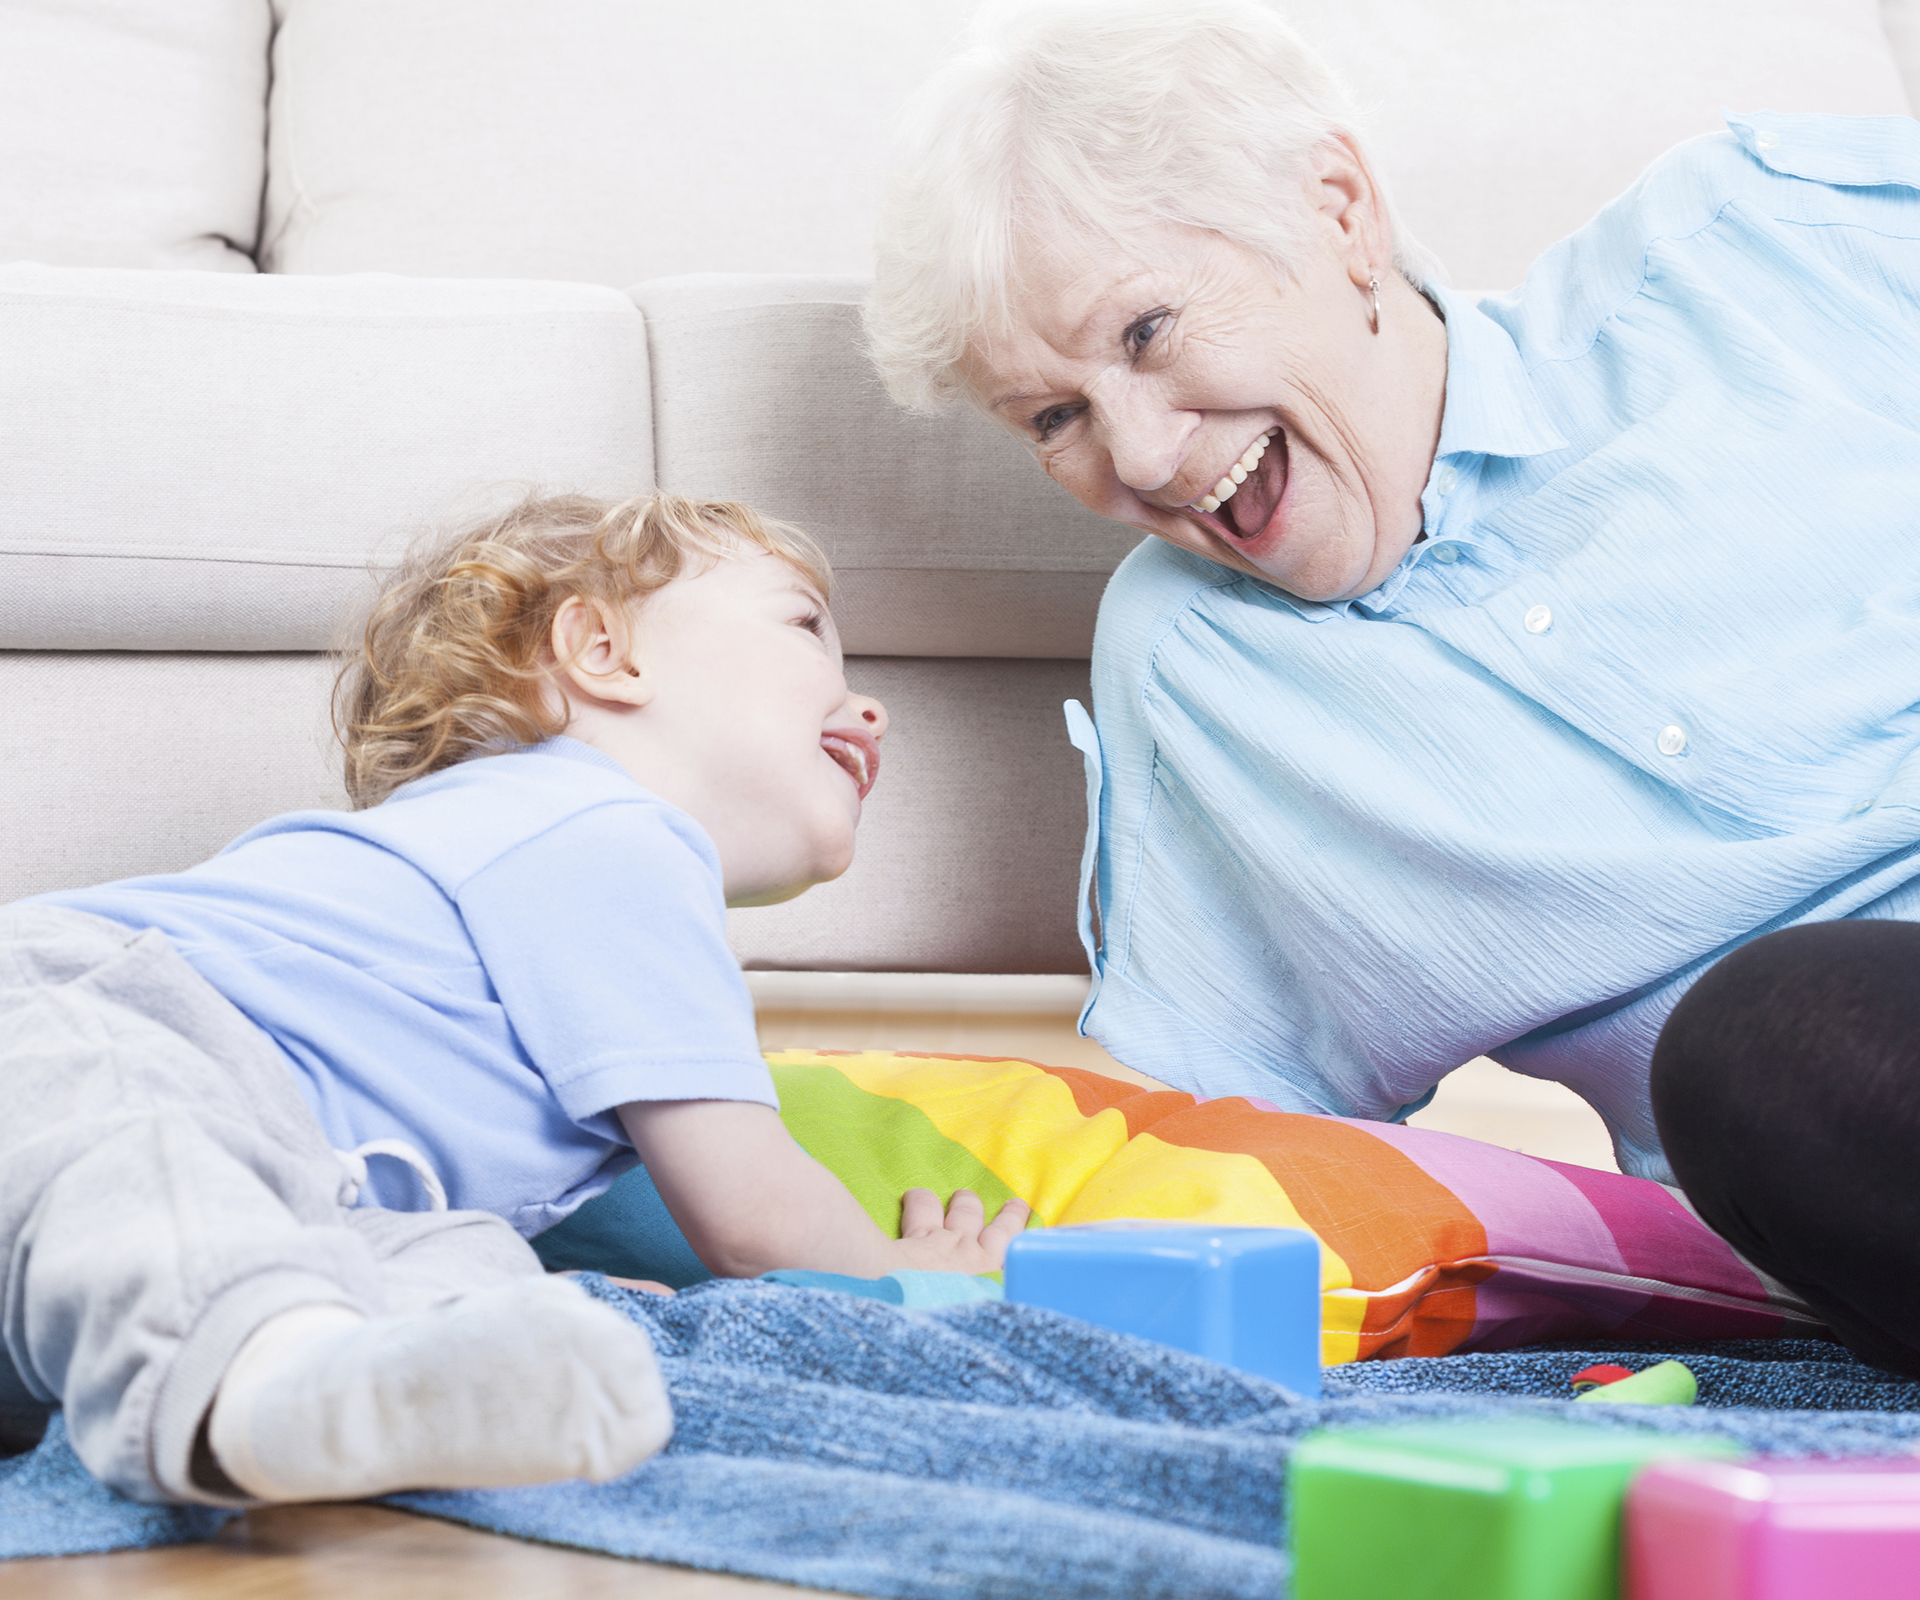 New study find grandparents the main childcare providers for working families